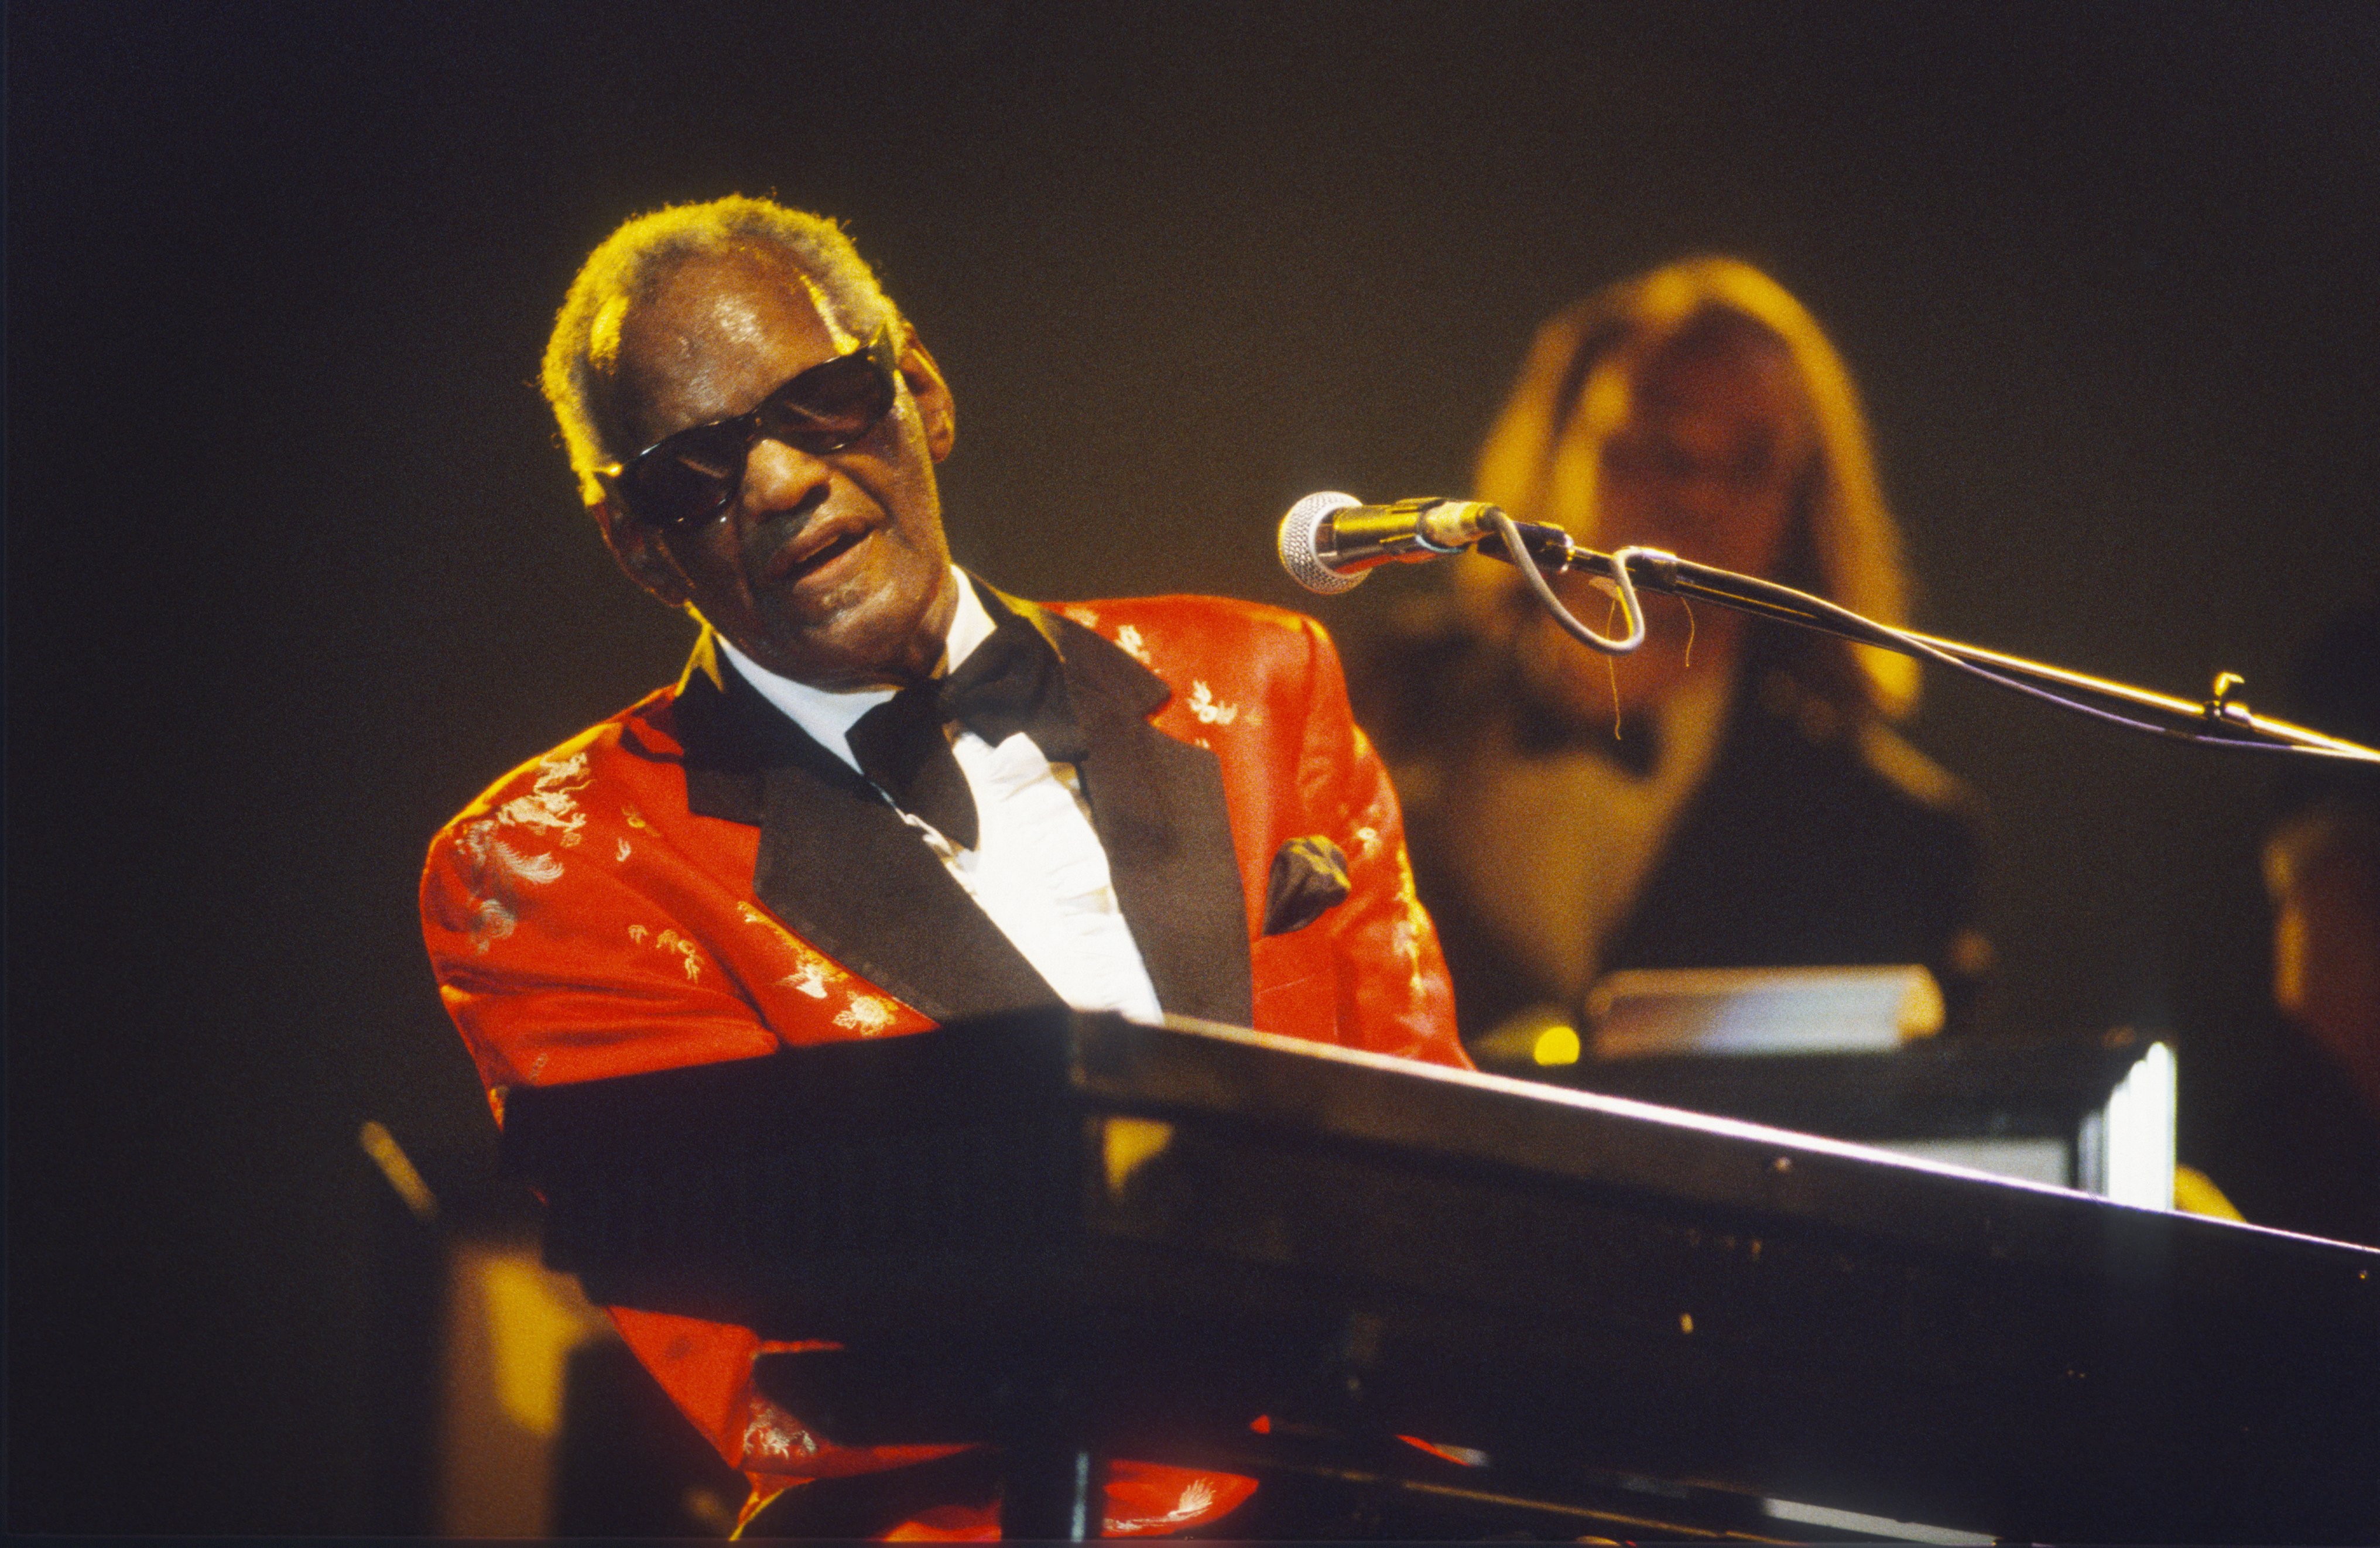 Ray Charles at the Rhythm 'n' Blues Festival, Peer, Belgium, 1994. | Photo: GettyImages